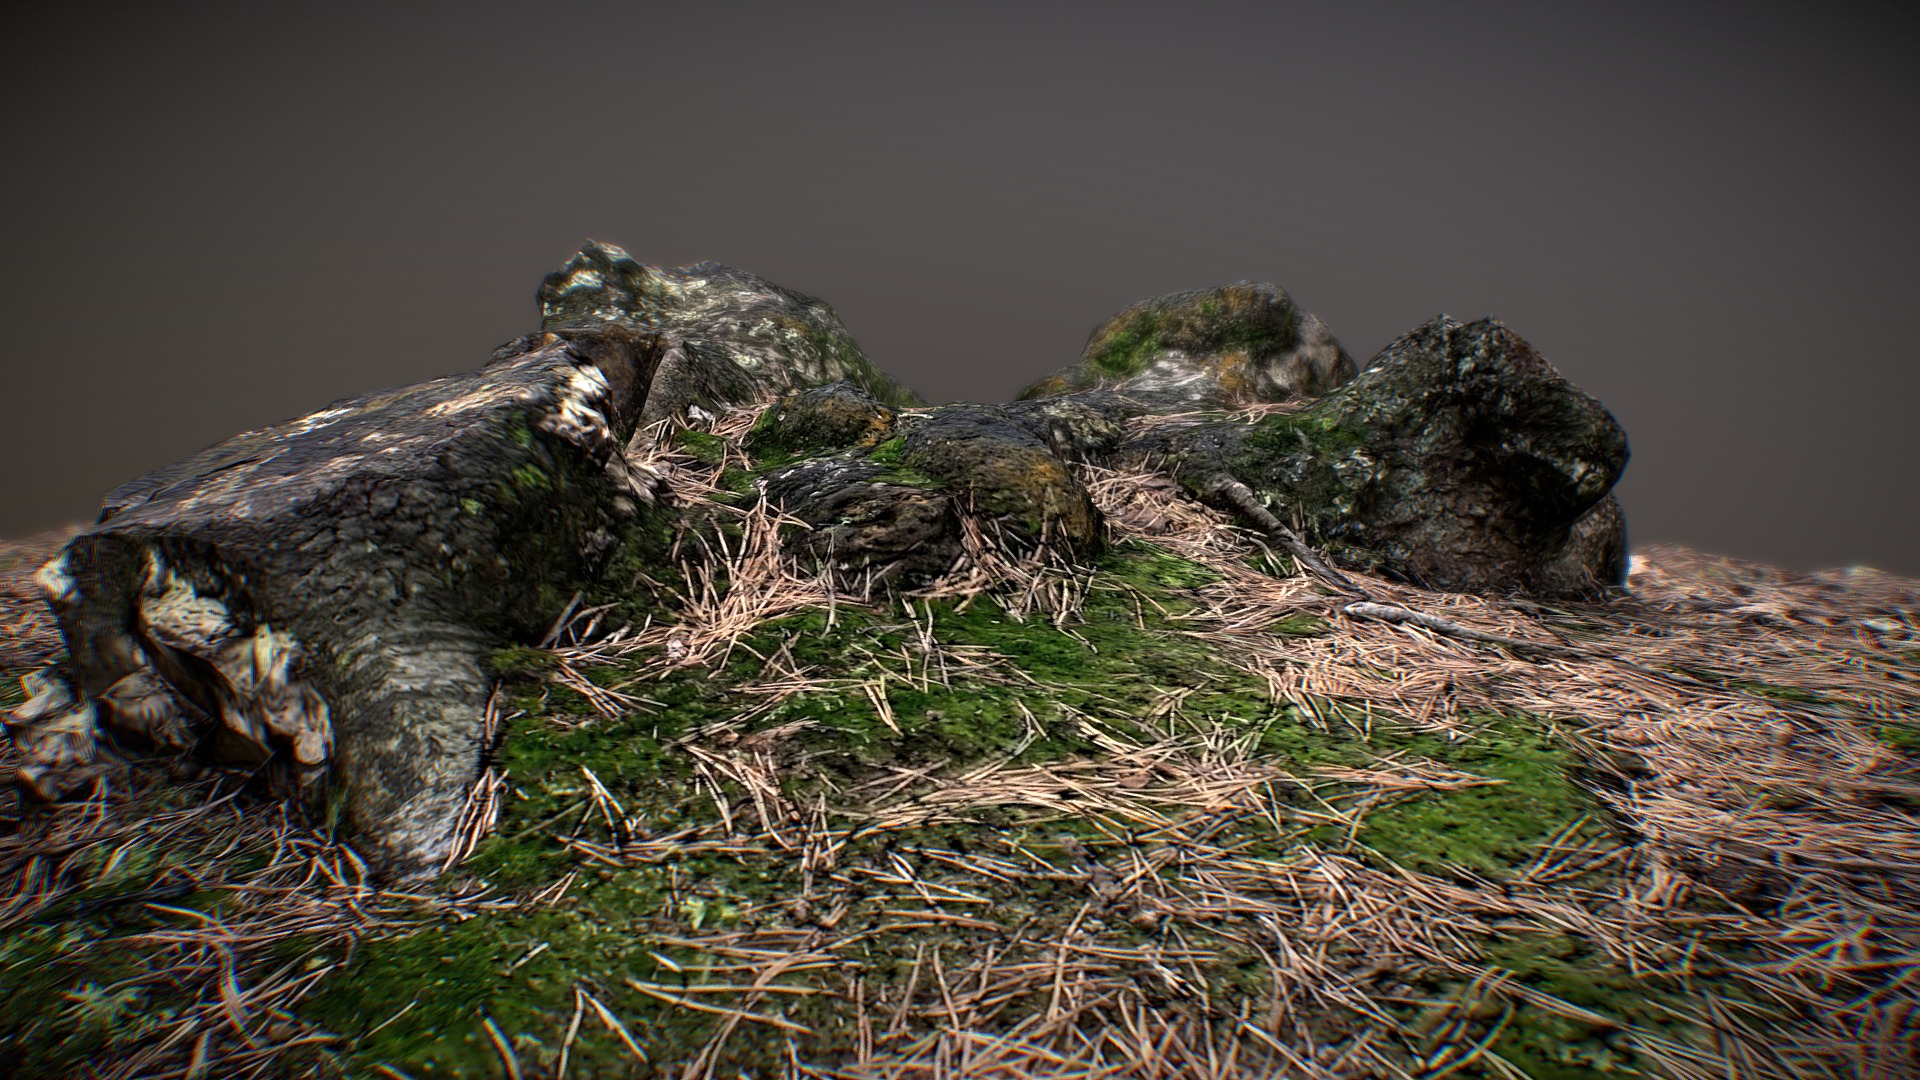 3D model Tree Stump 003: Photogrammetry - This is a 3D model of the Tree Stump 003: Photogrammetry. The 3D model is about a group of alligators in the grass.